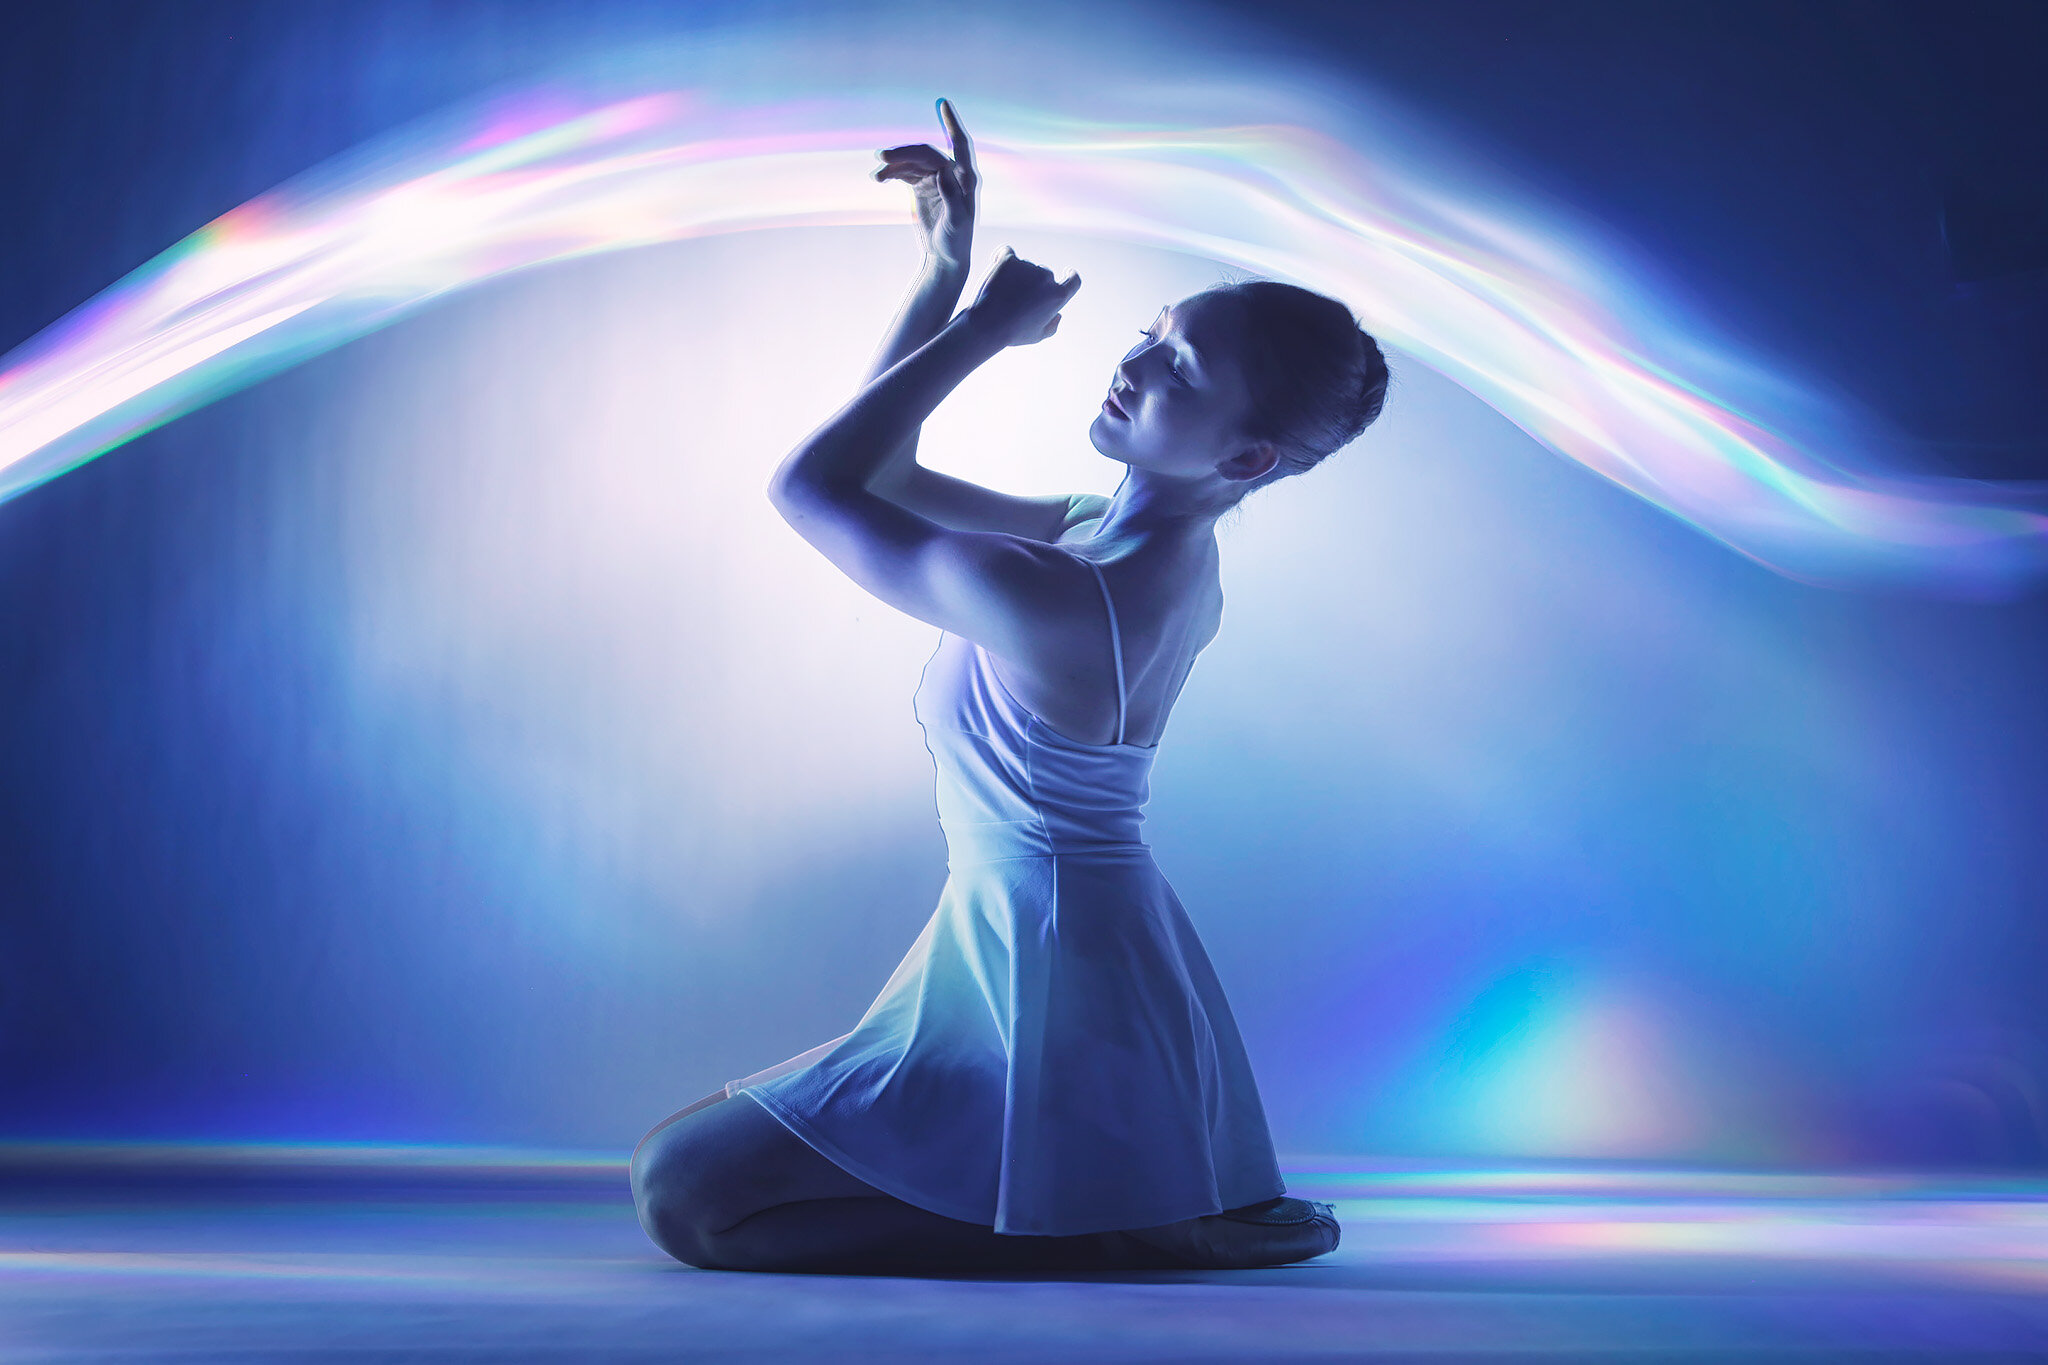 Light-Painting Photography by Eric Paré